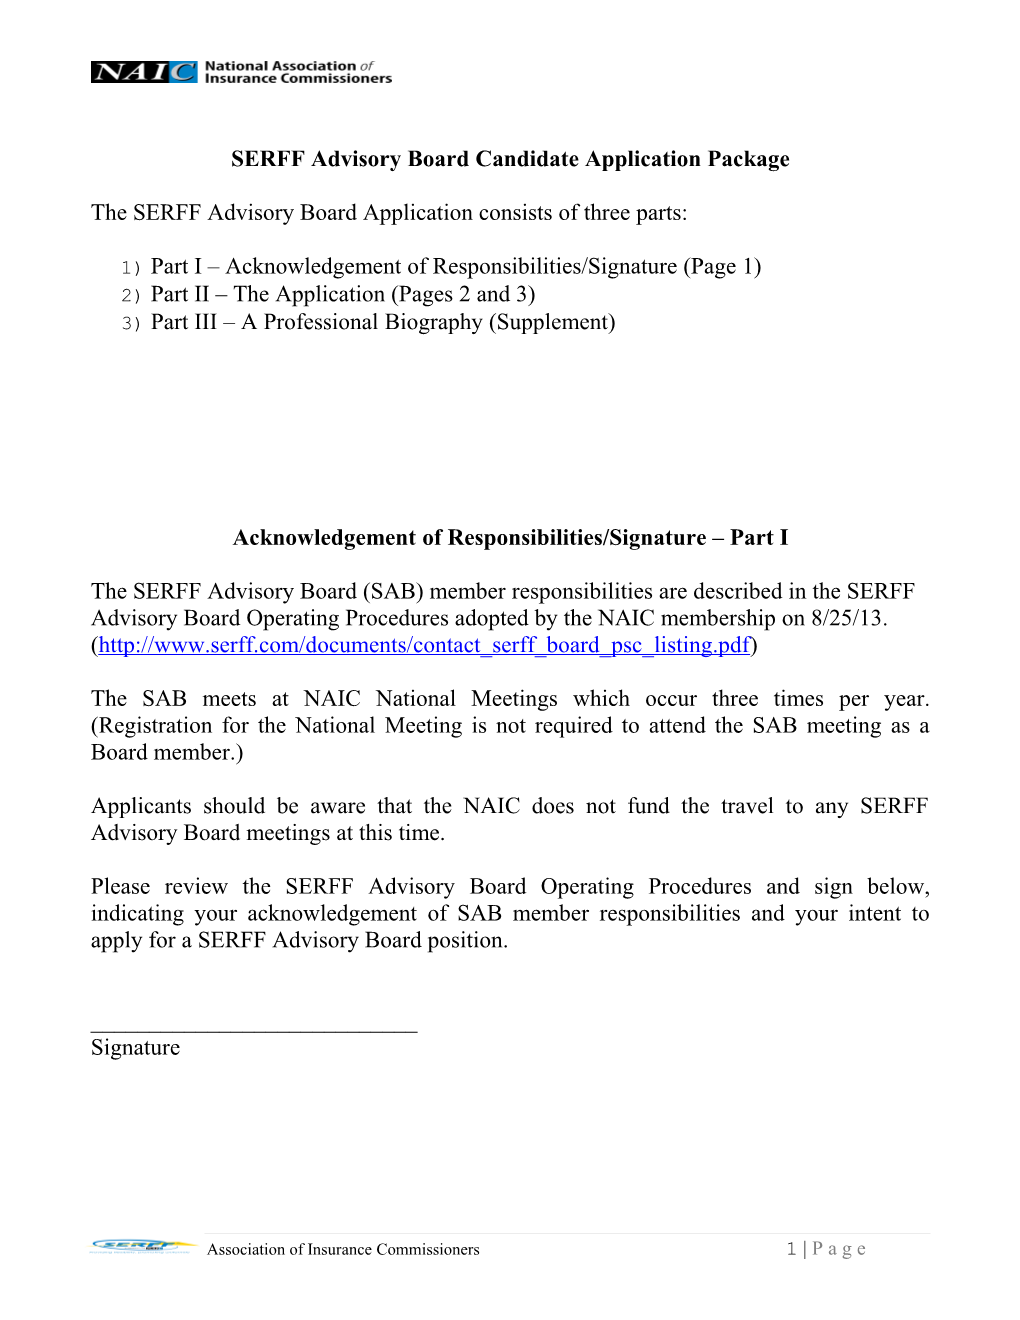 SERFF Advisory Board Candidate Application Package